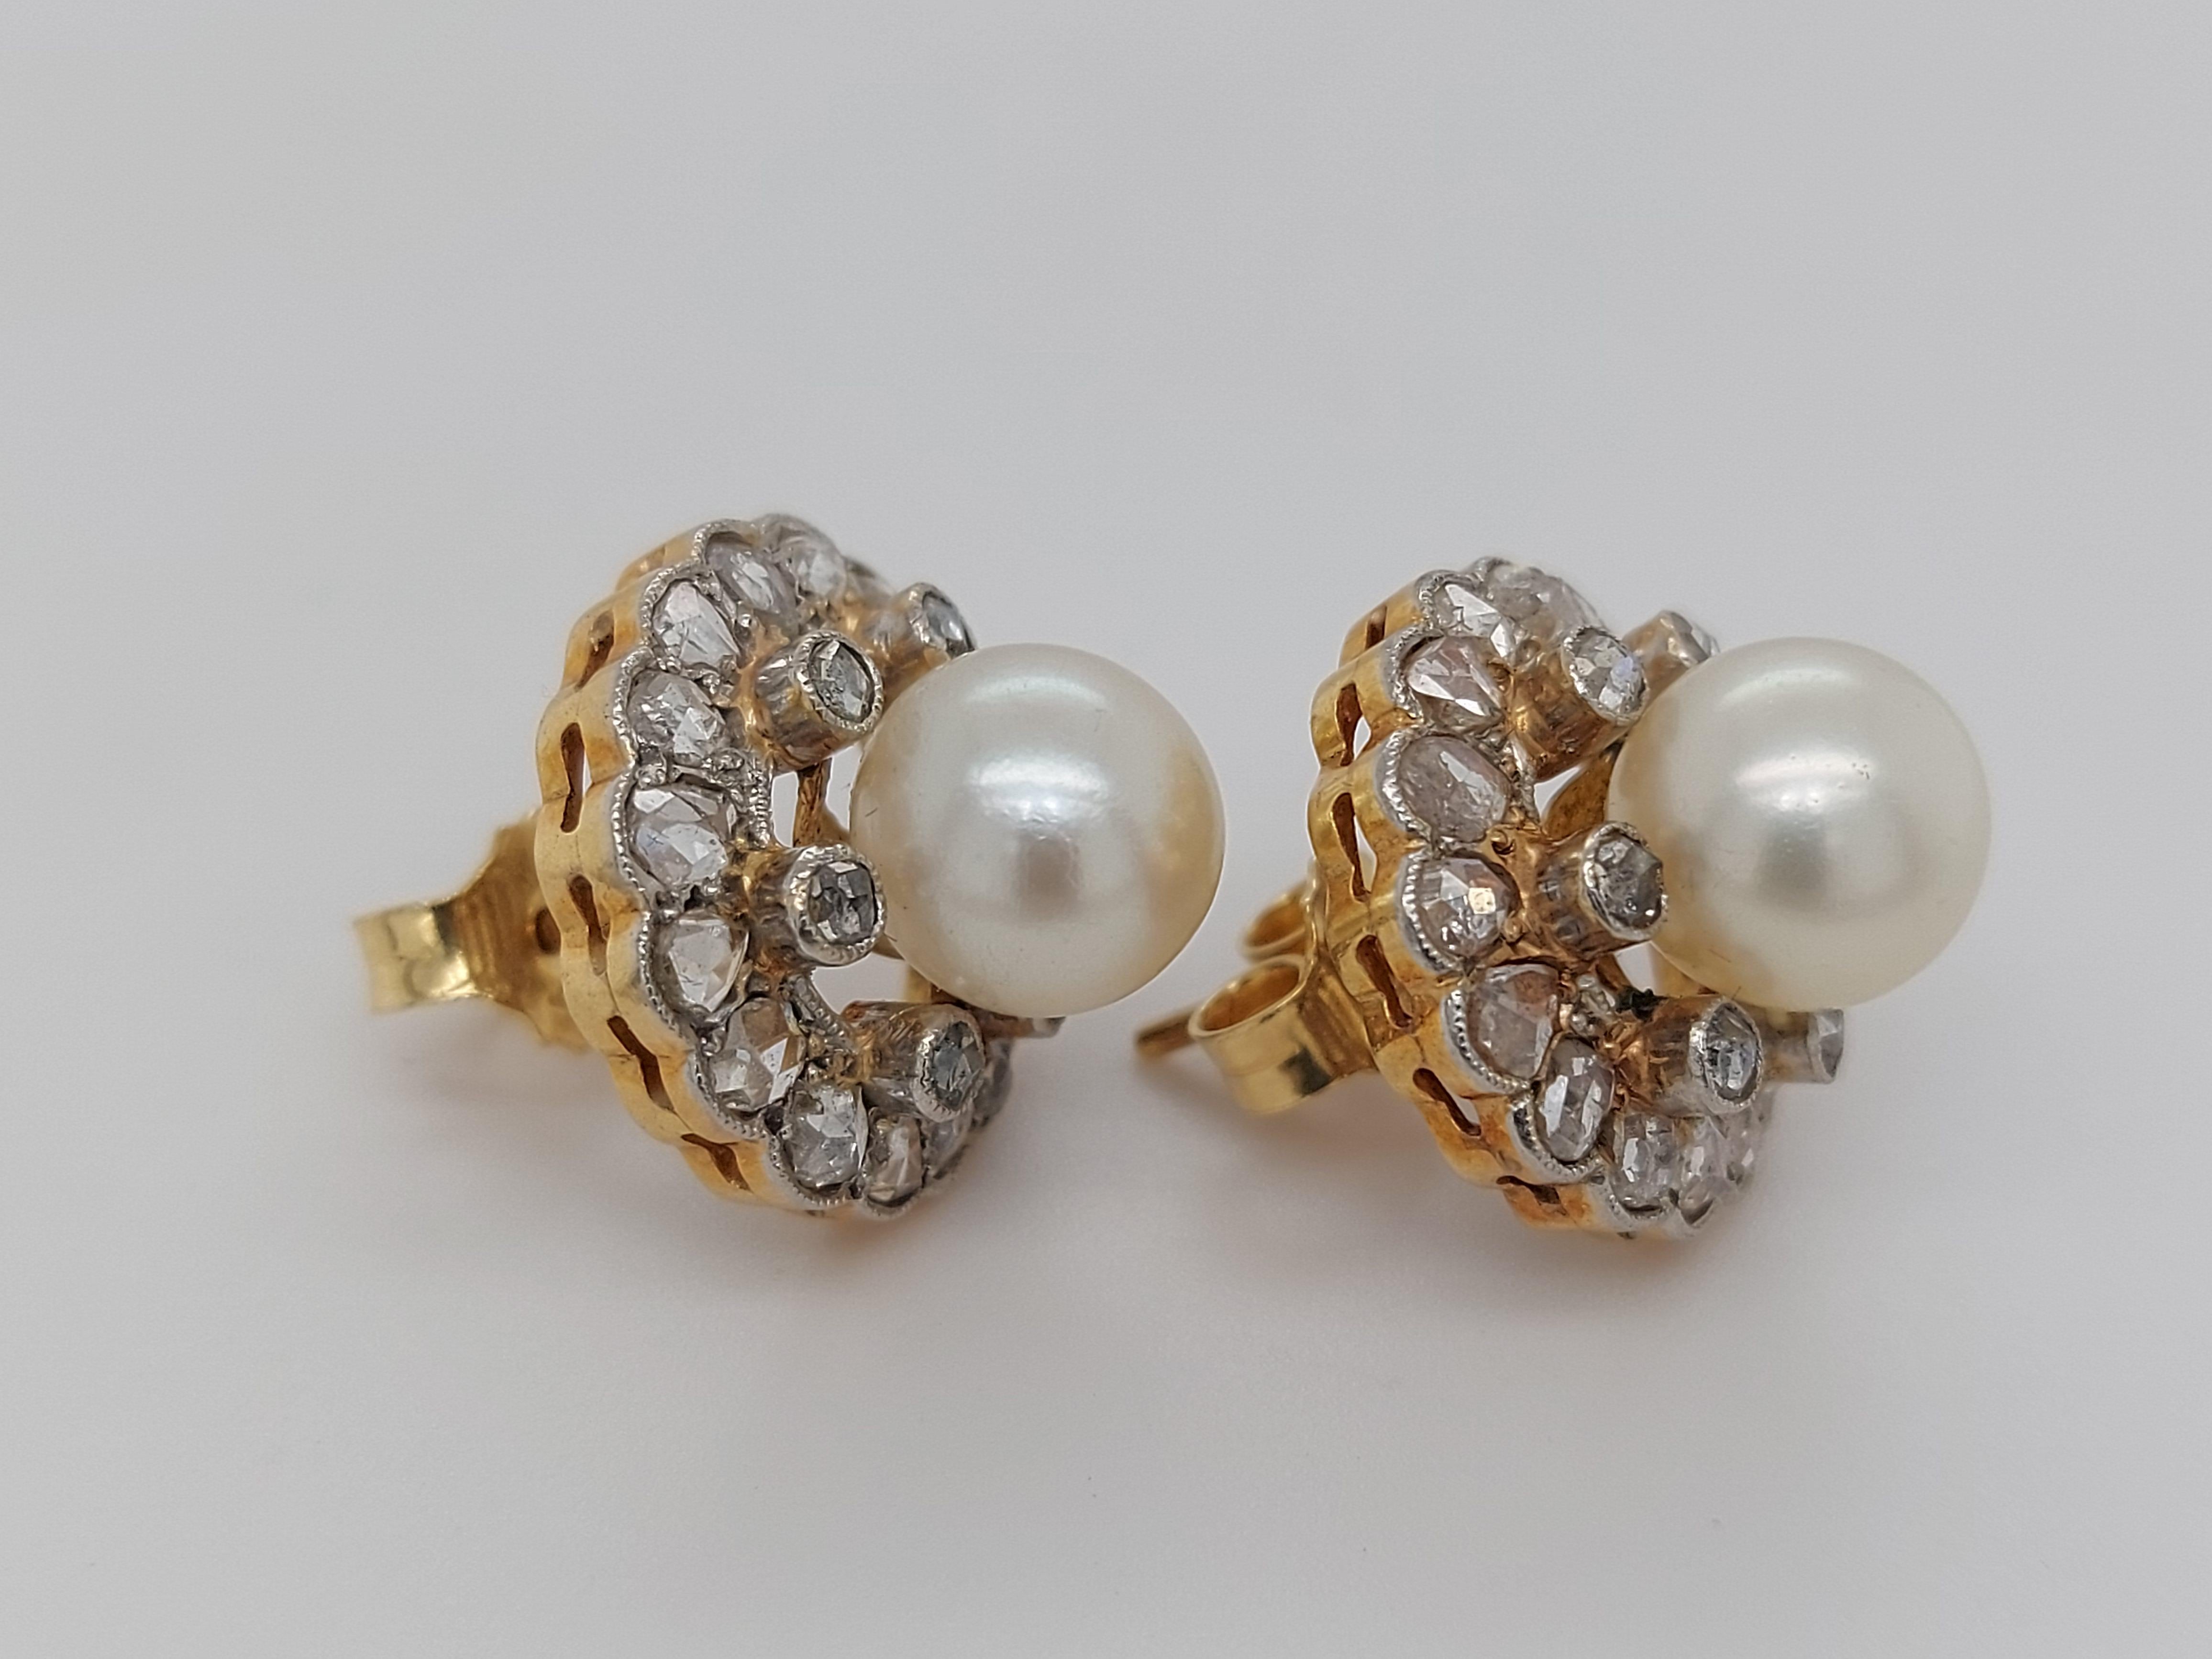 Beautiful Platinum and Gold Ring and Earrings Rose Cut Diamonds and Pearls For Sale 8